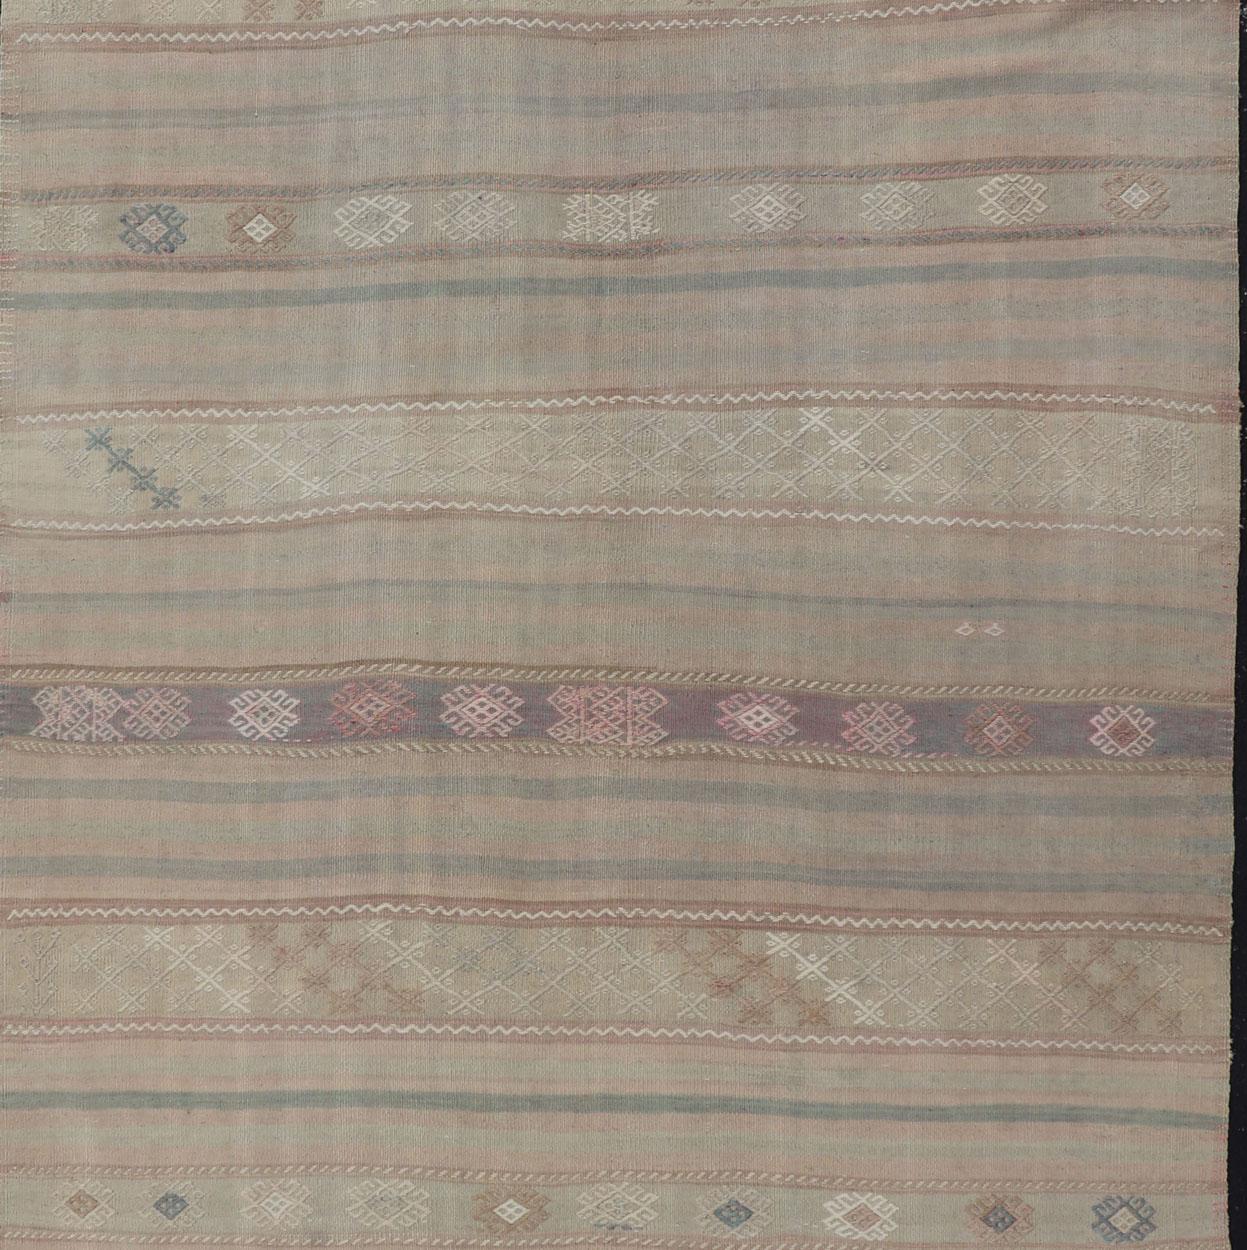 20th Century Flat-Weave Turkish Kilim with Embroideries in Earthy Tones and Hints of Pink For Sale